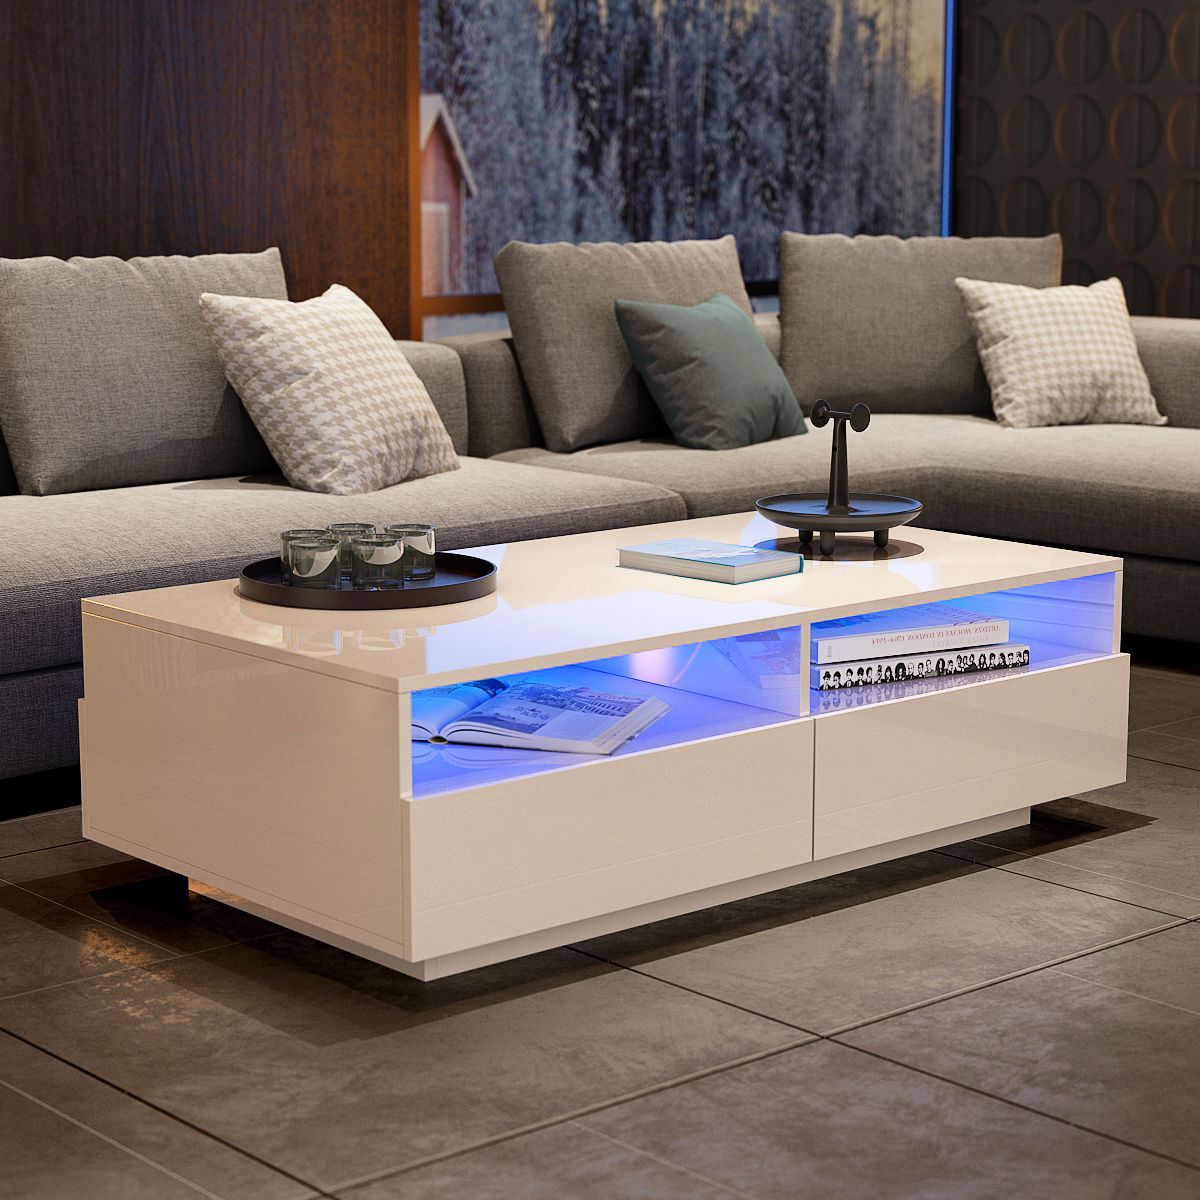 Favorite Led Coffee Tables With 4 Drawers In White High Gloss Coffee Table With Led Lights : High Gloss White Coffee (View 11 of 15)